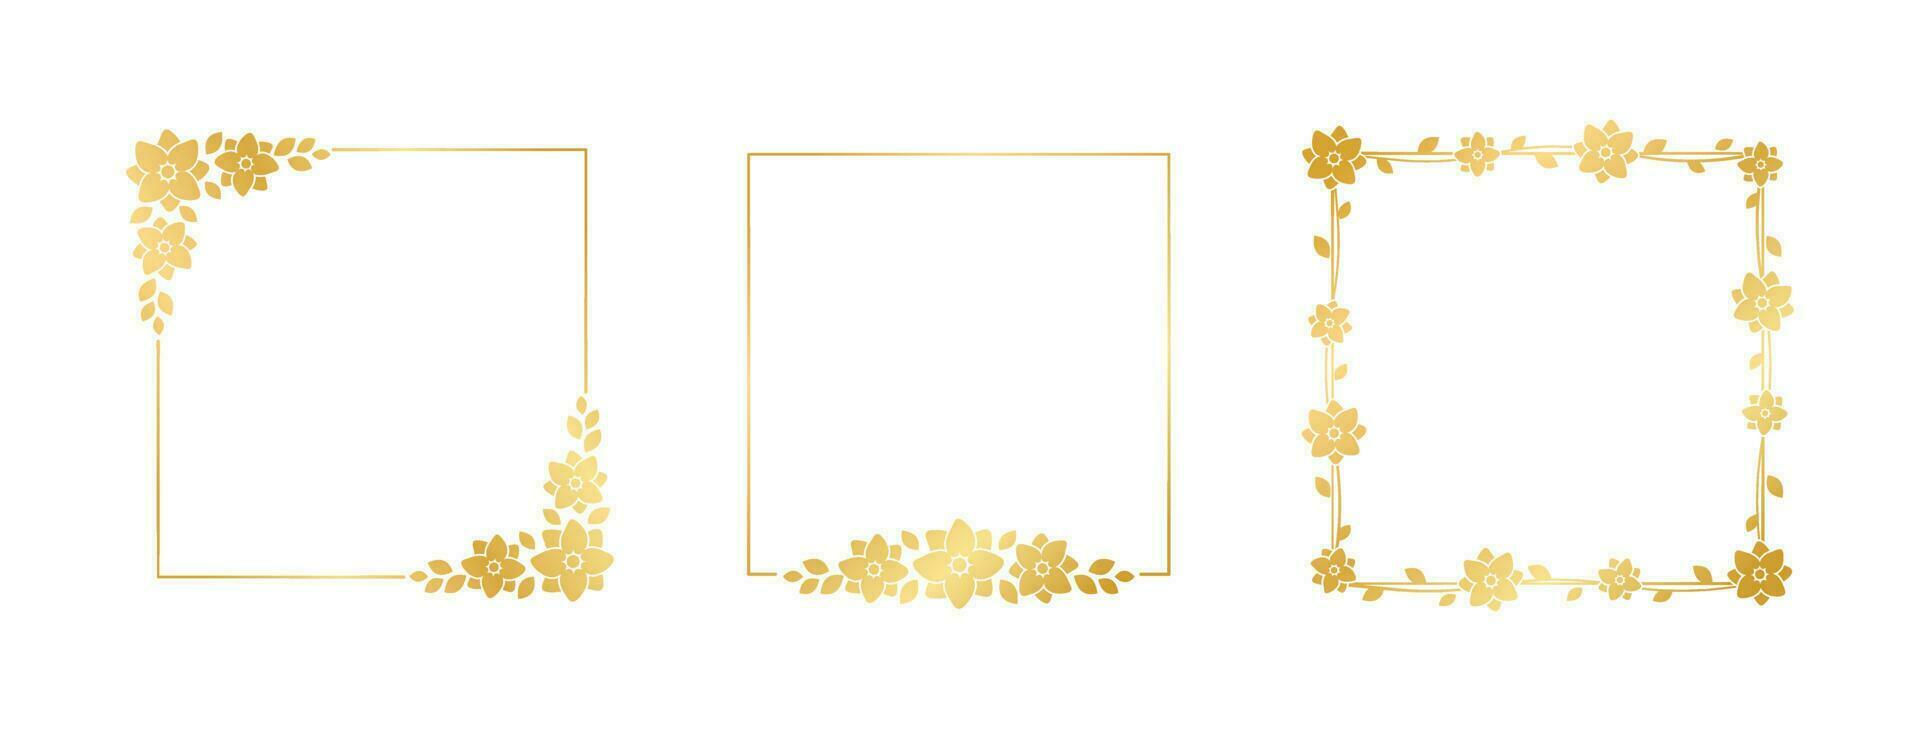 Square gold floral frame collection set. Luxury golden frame border for invite, wedding, certificate. Vector art with flowers and leaves.